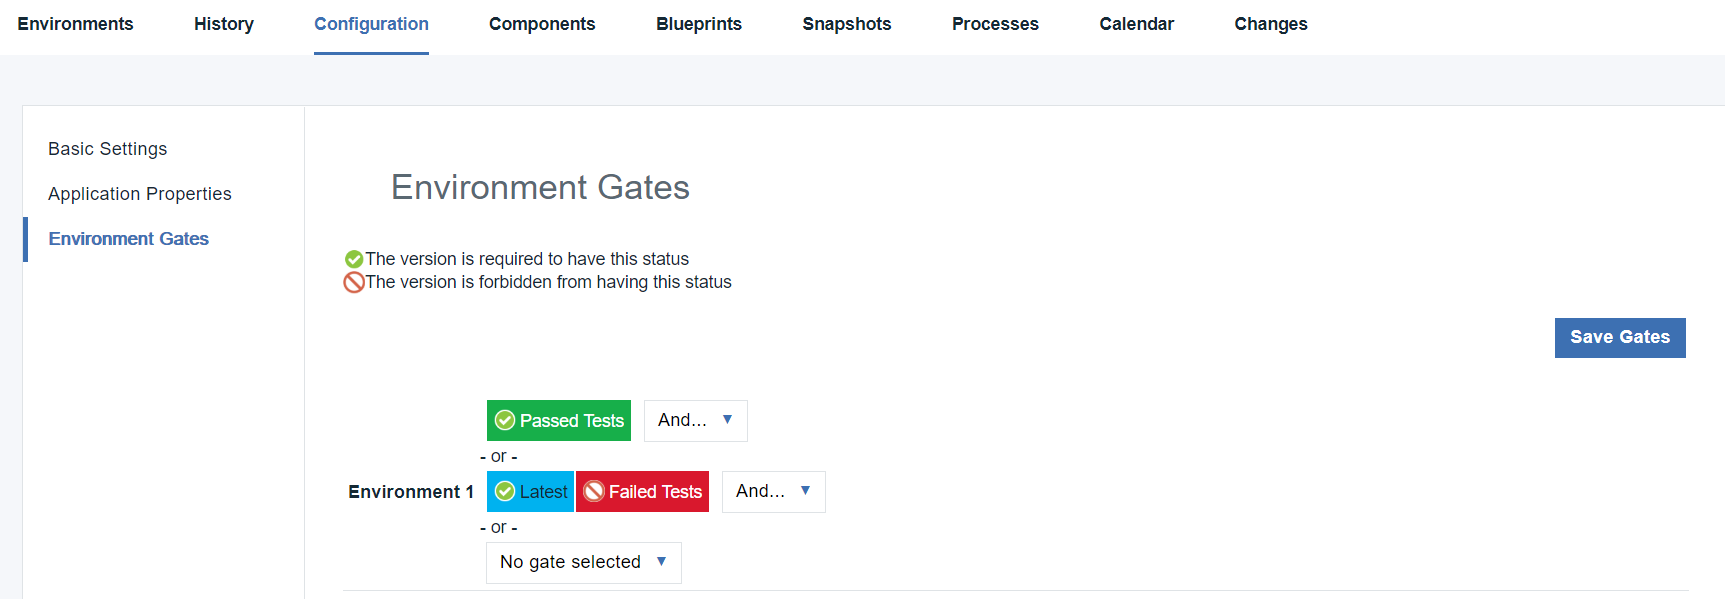 A simple environment gate that requires components to have at least one of two component version statuses